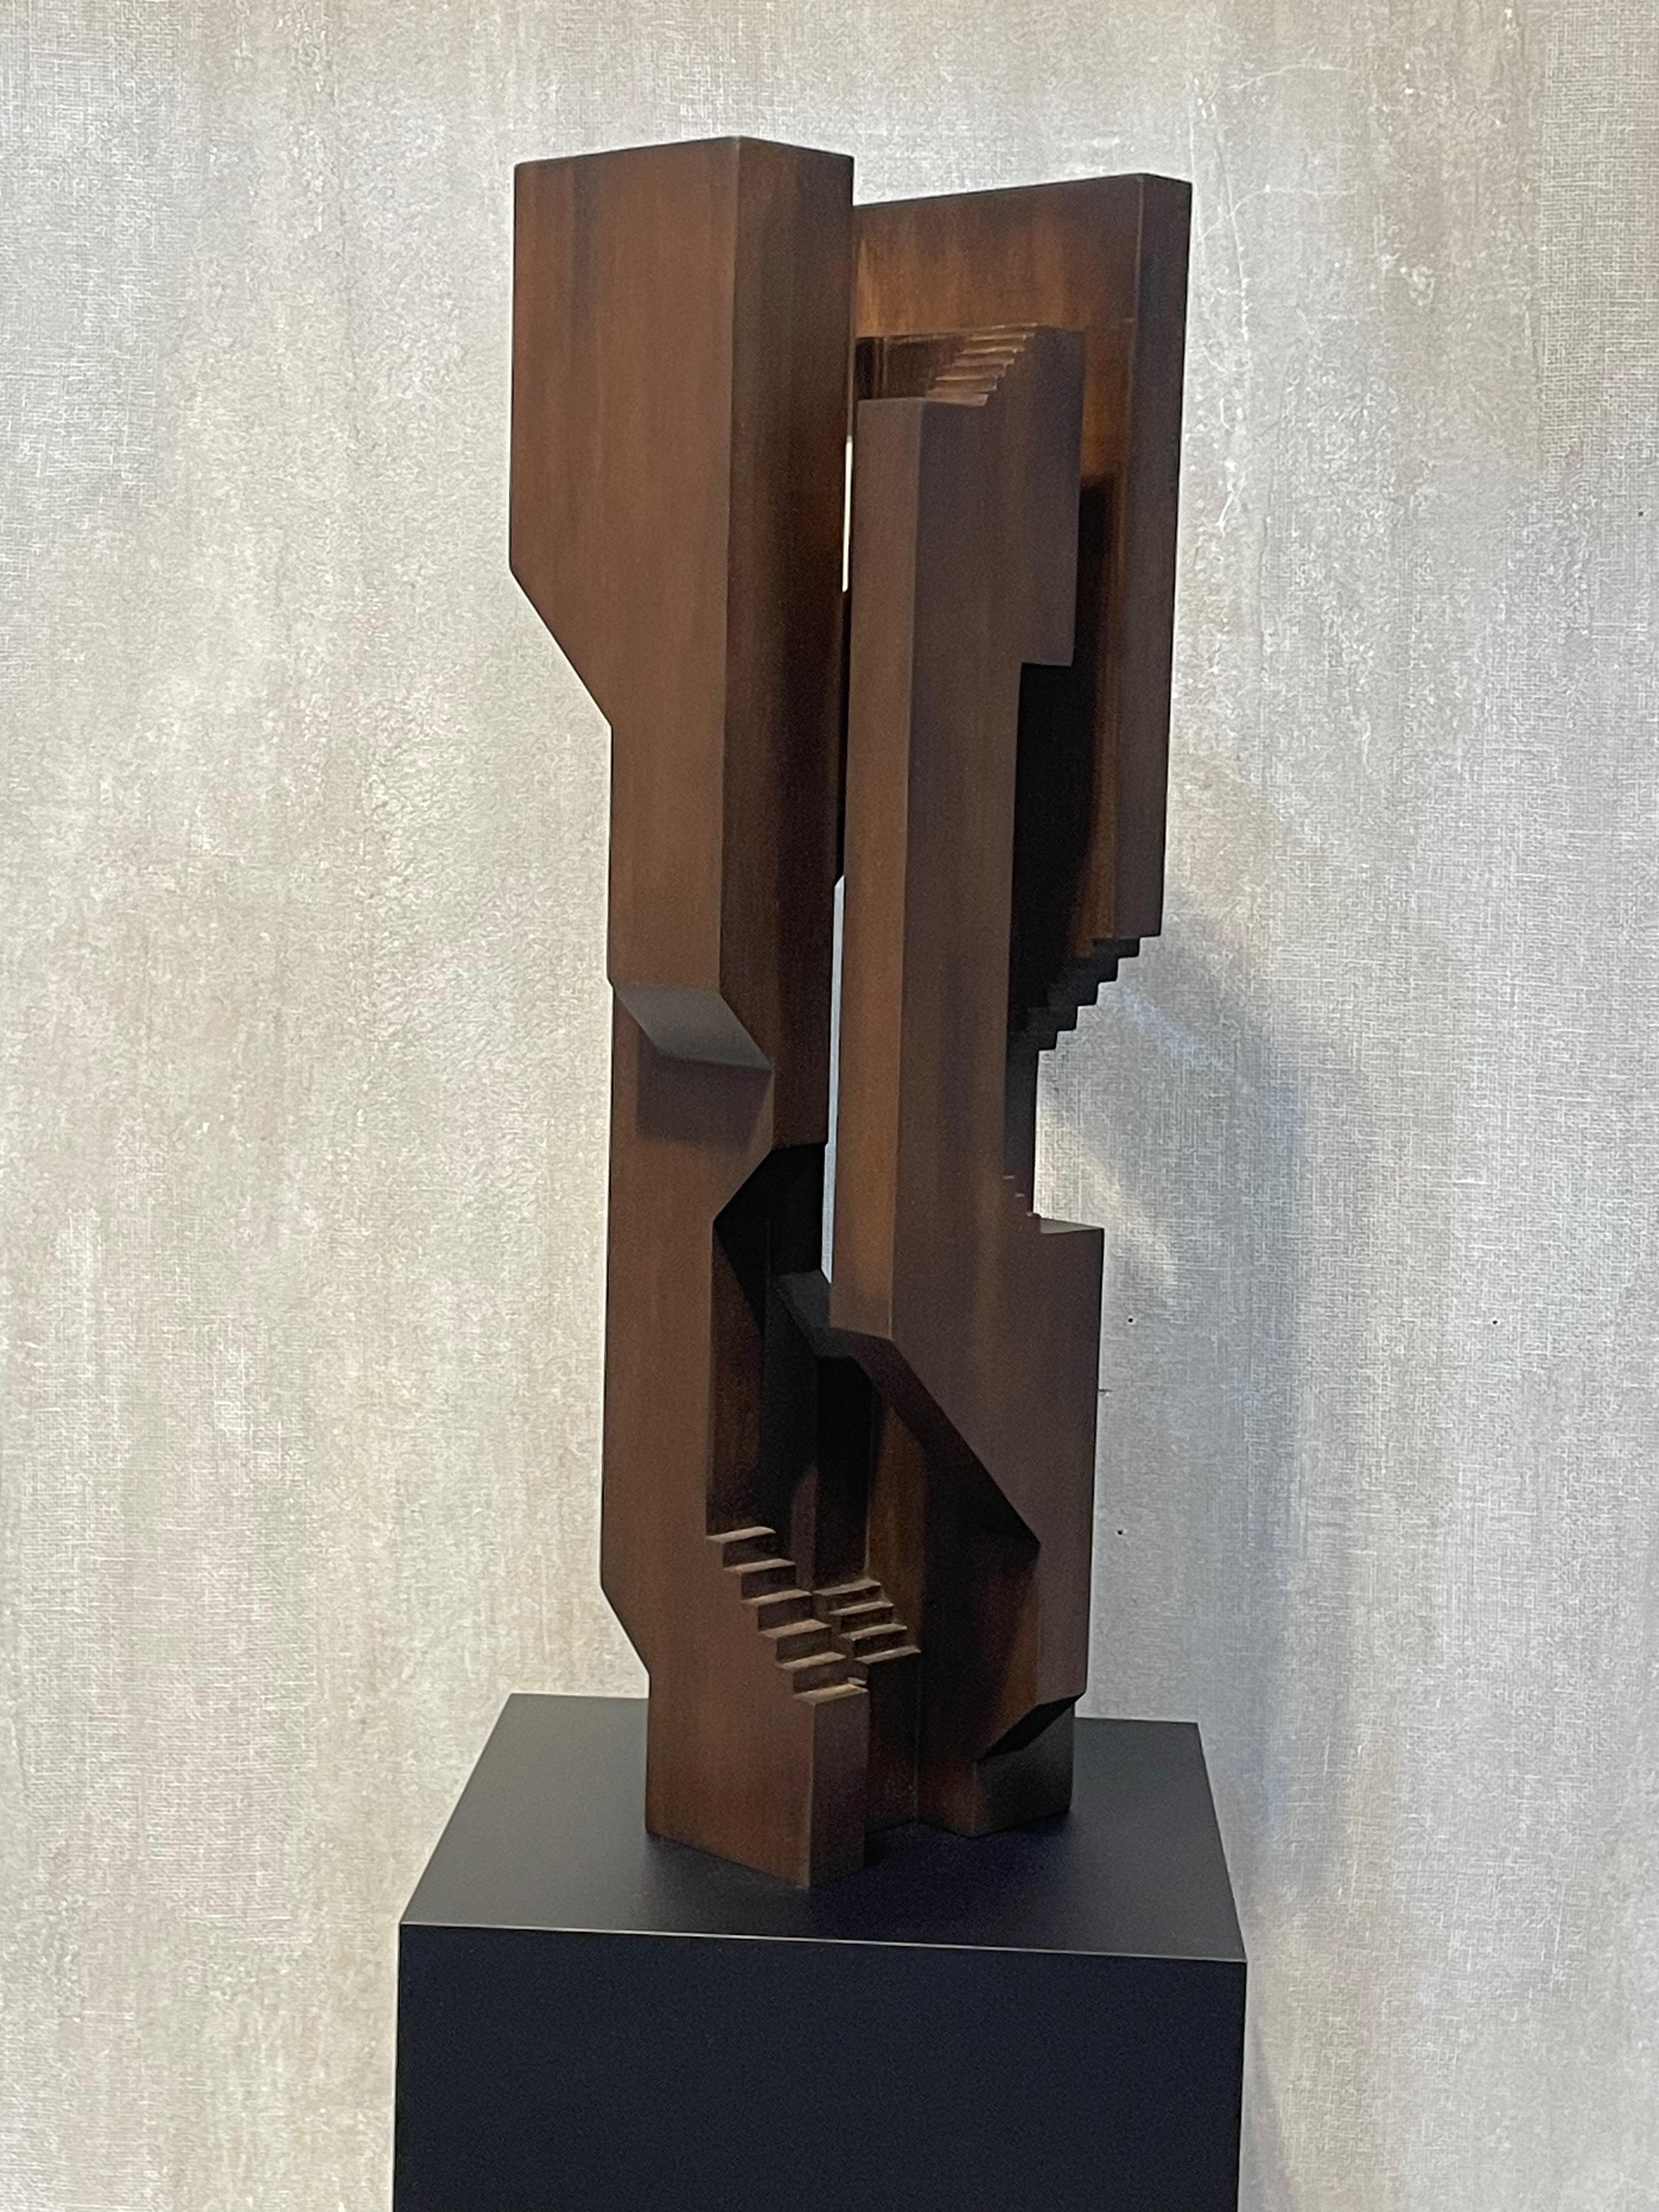 Canadian Espresso Brown Wooden Abstract Sculpture By David Umemoto, Canada, Contemporary  For Sale